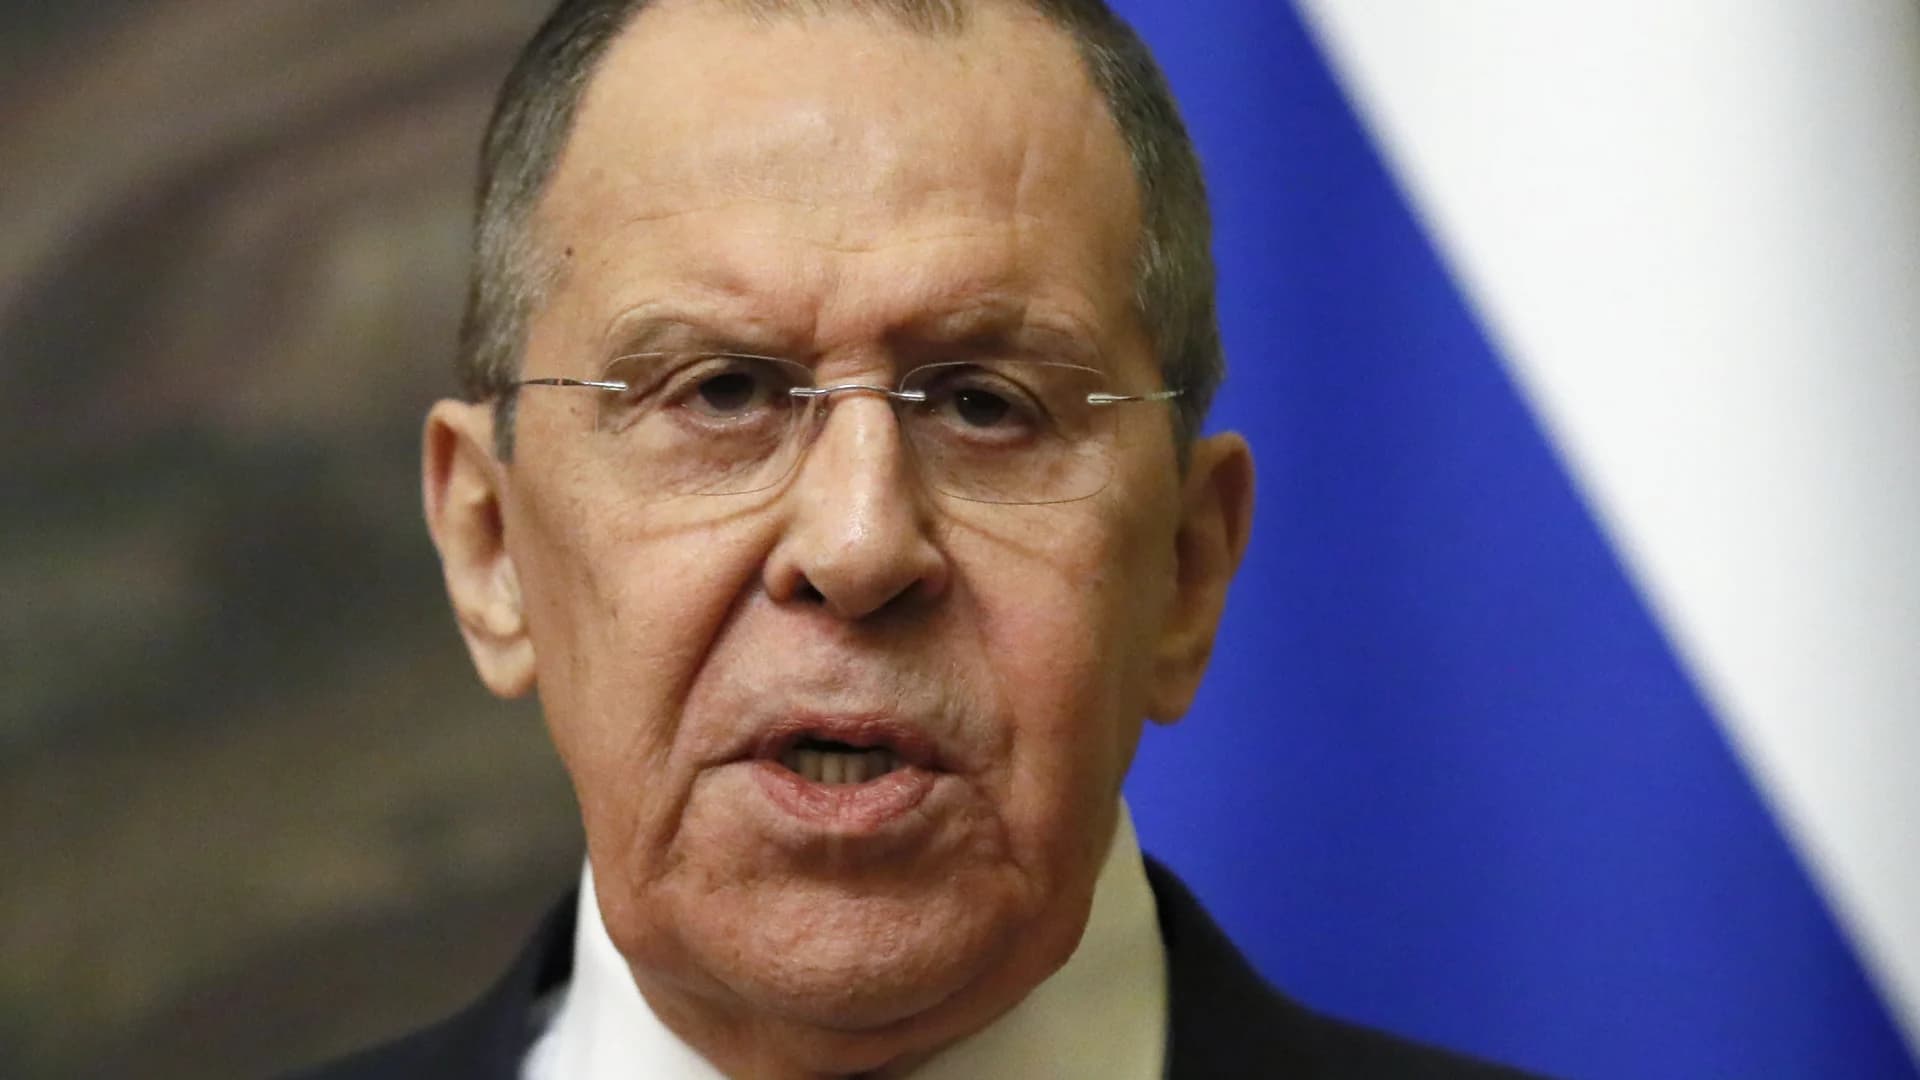 Israel lashes out at Russia over comments by its foreign minister about Nazism and antisemitism